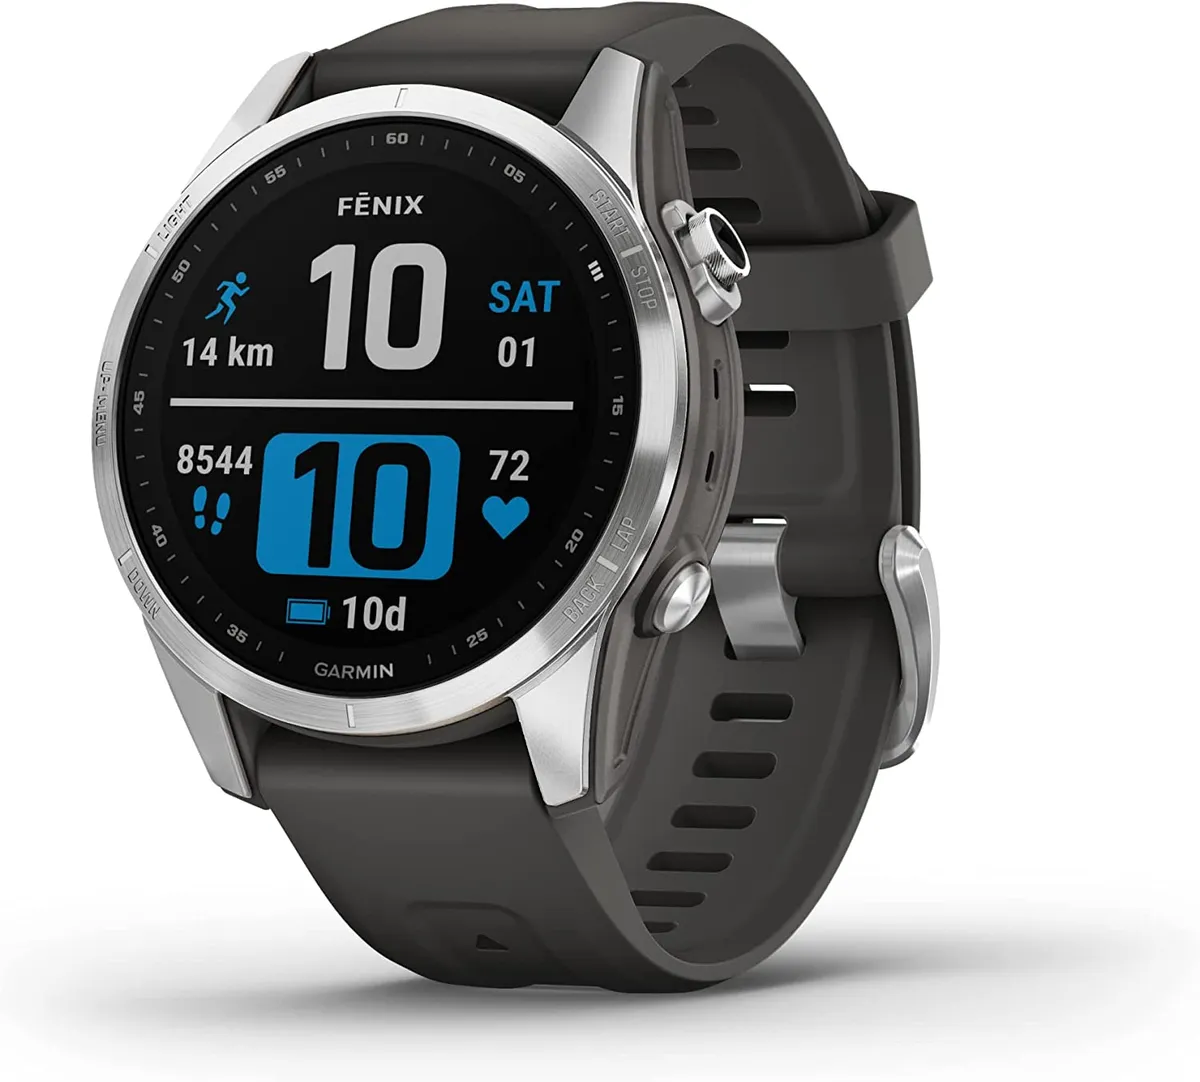 There's a Black Friday deal on  UK, so I could resist to grab a Garmin  Index S2 for £89. : r/Garmin